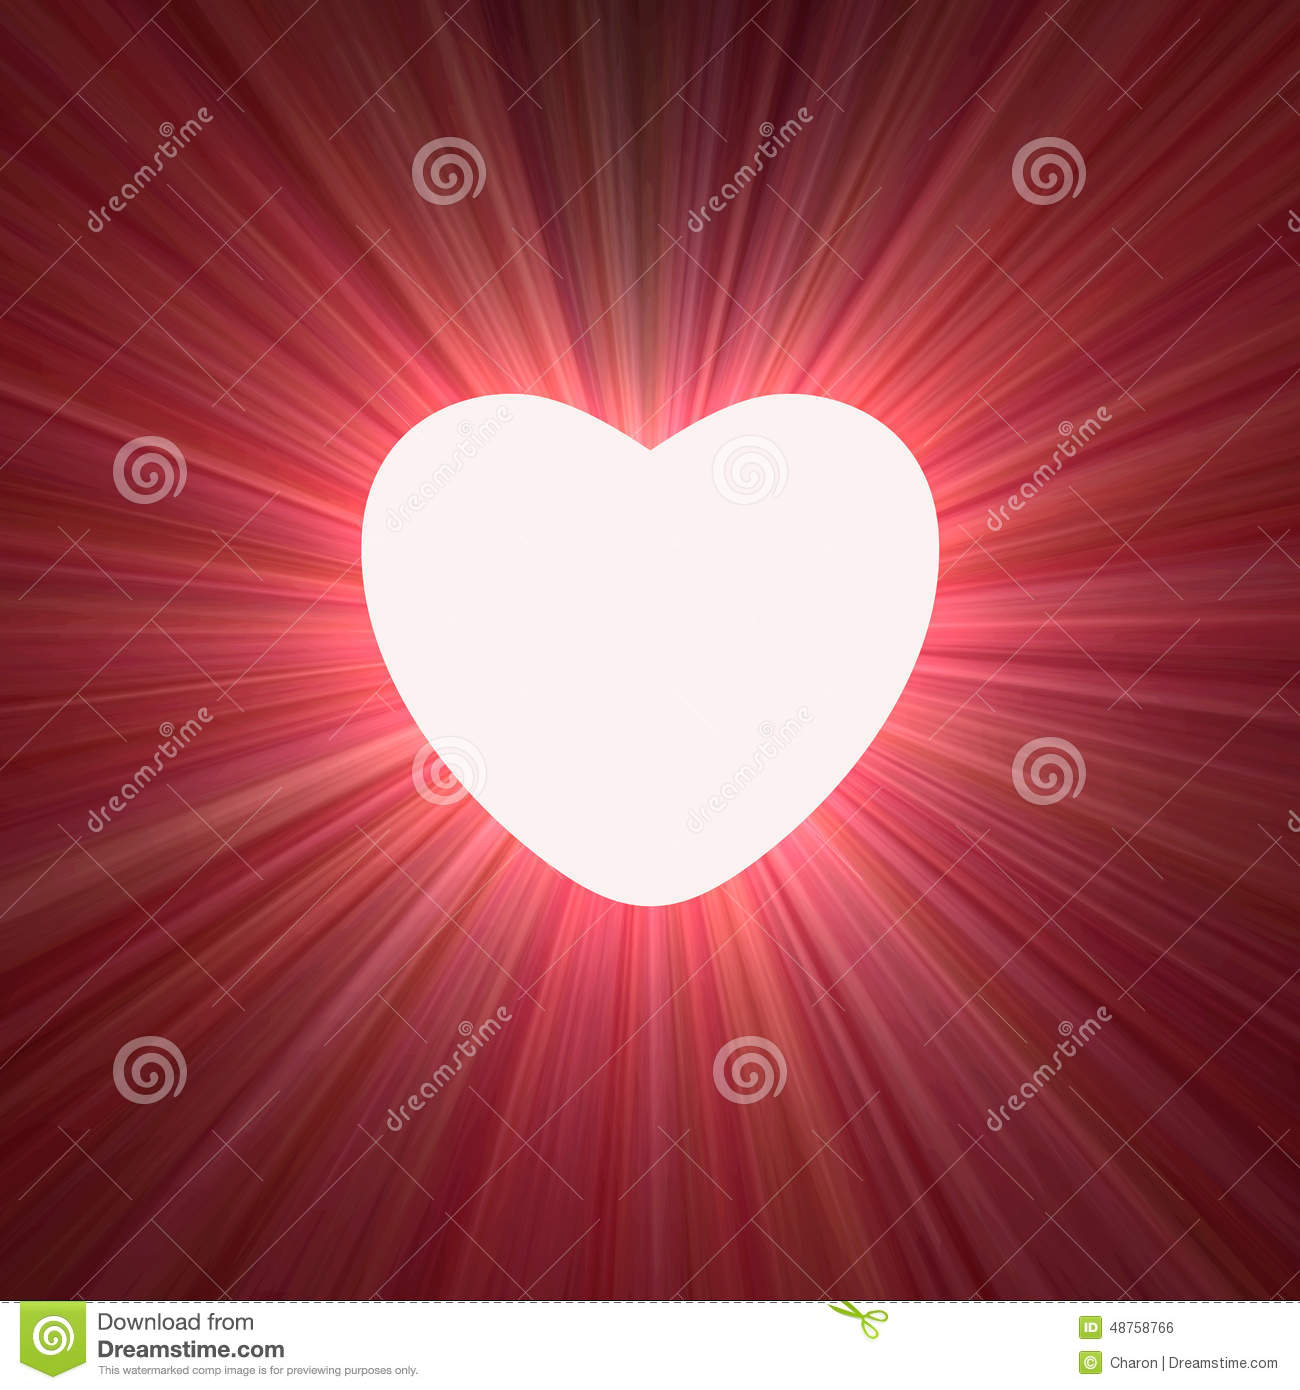 Bright Heart With Joyful Light Beams And Powerful Halo  Valentine And